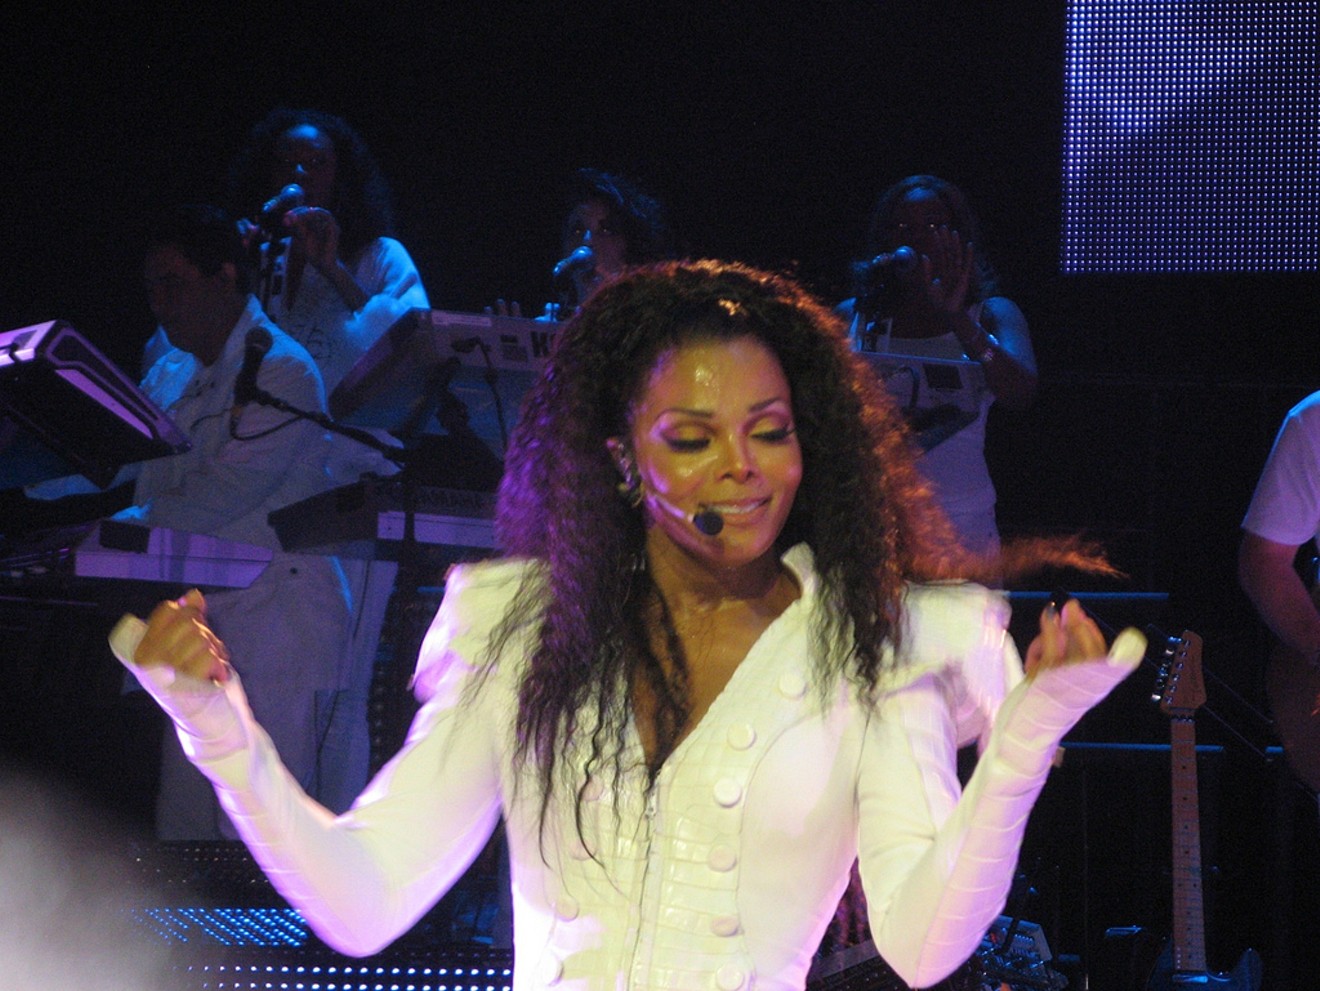 It's doubtful Janet Jackson will ever be invited back to perform at the Super Bowl Halftime Show.